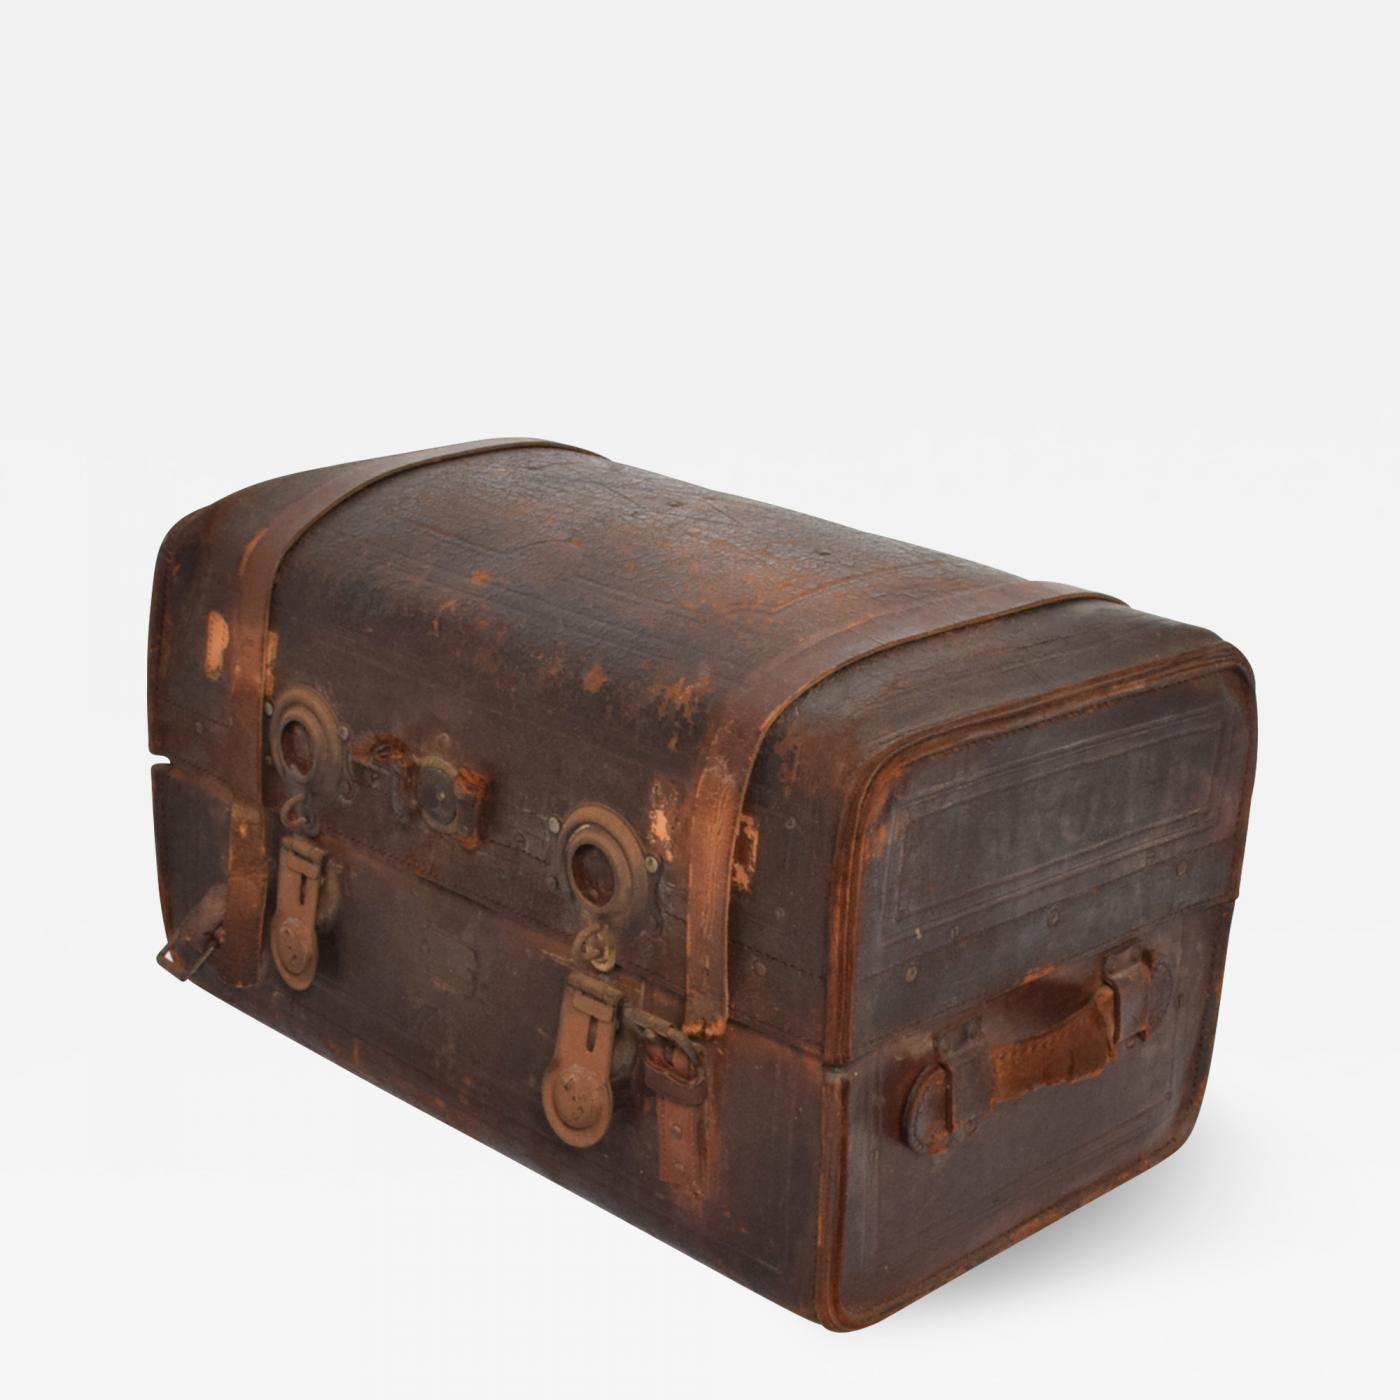 Antique Steamer Trunk Distressed Leather Travel by S. Dennin New York